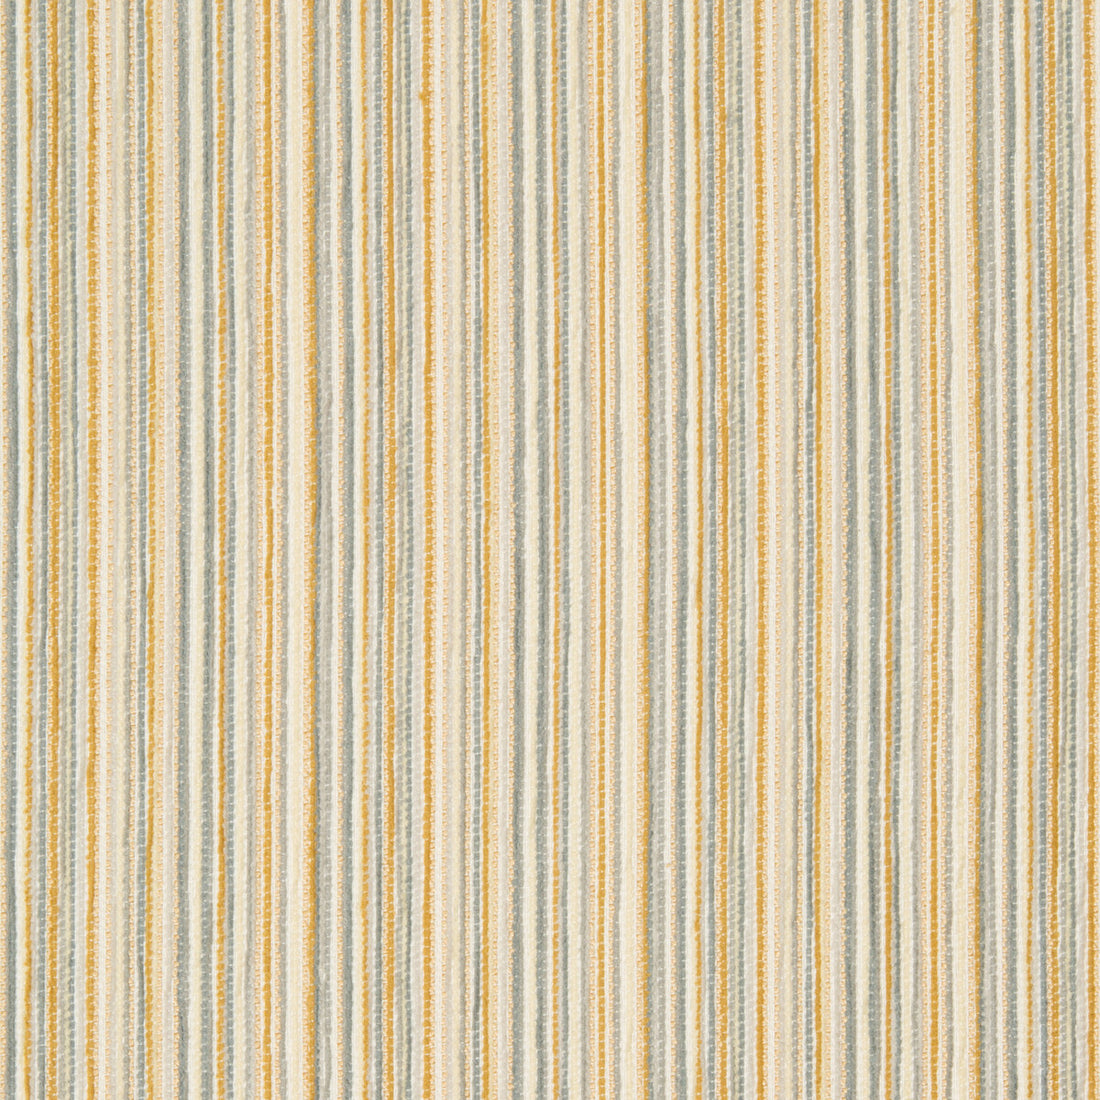 Kravet Design fabric in 34693-411 color - pattern 34693.411.0 - by Kravet Design in the Crypton Home collection